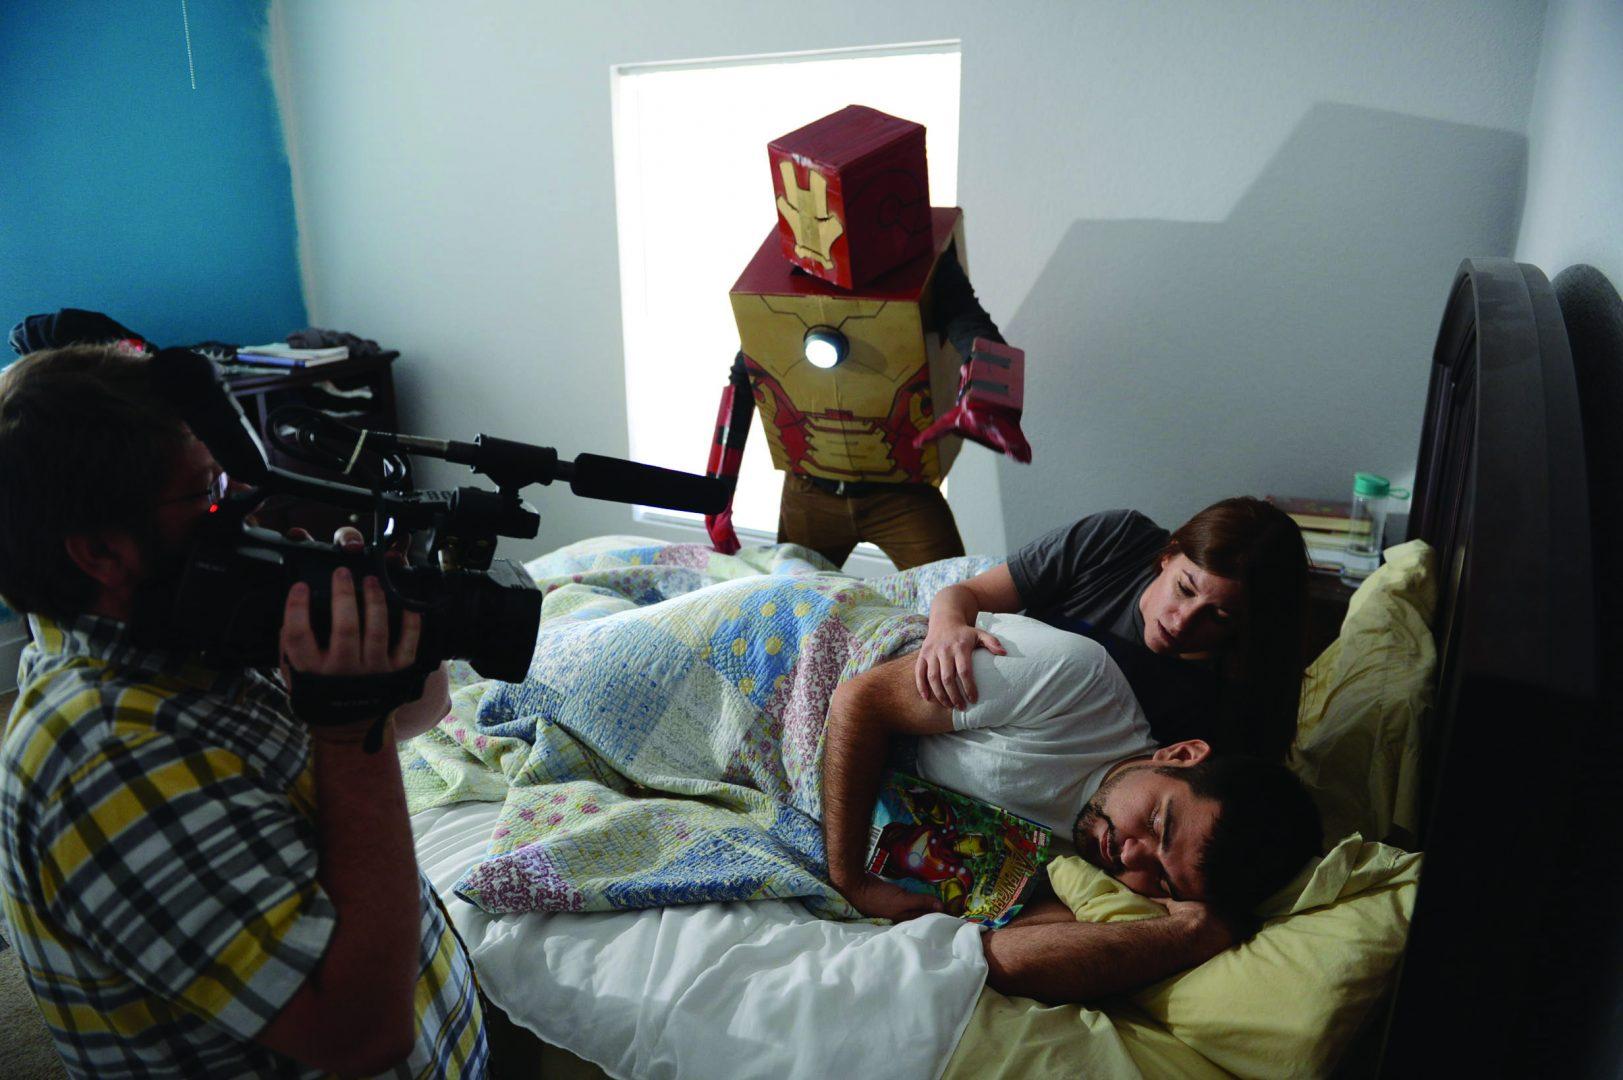 Photo by Mark Crosse

Behind the scenes of Roque Rodriguez and Bryan Harleys sweded Iron Man 3 trailer (From left: Bryan Harley, Jay Montes as Iron Man, Heather McLane, Roque Rodriguez).